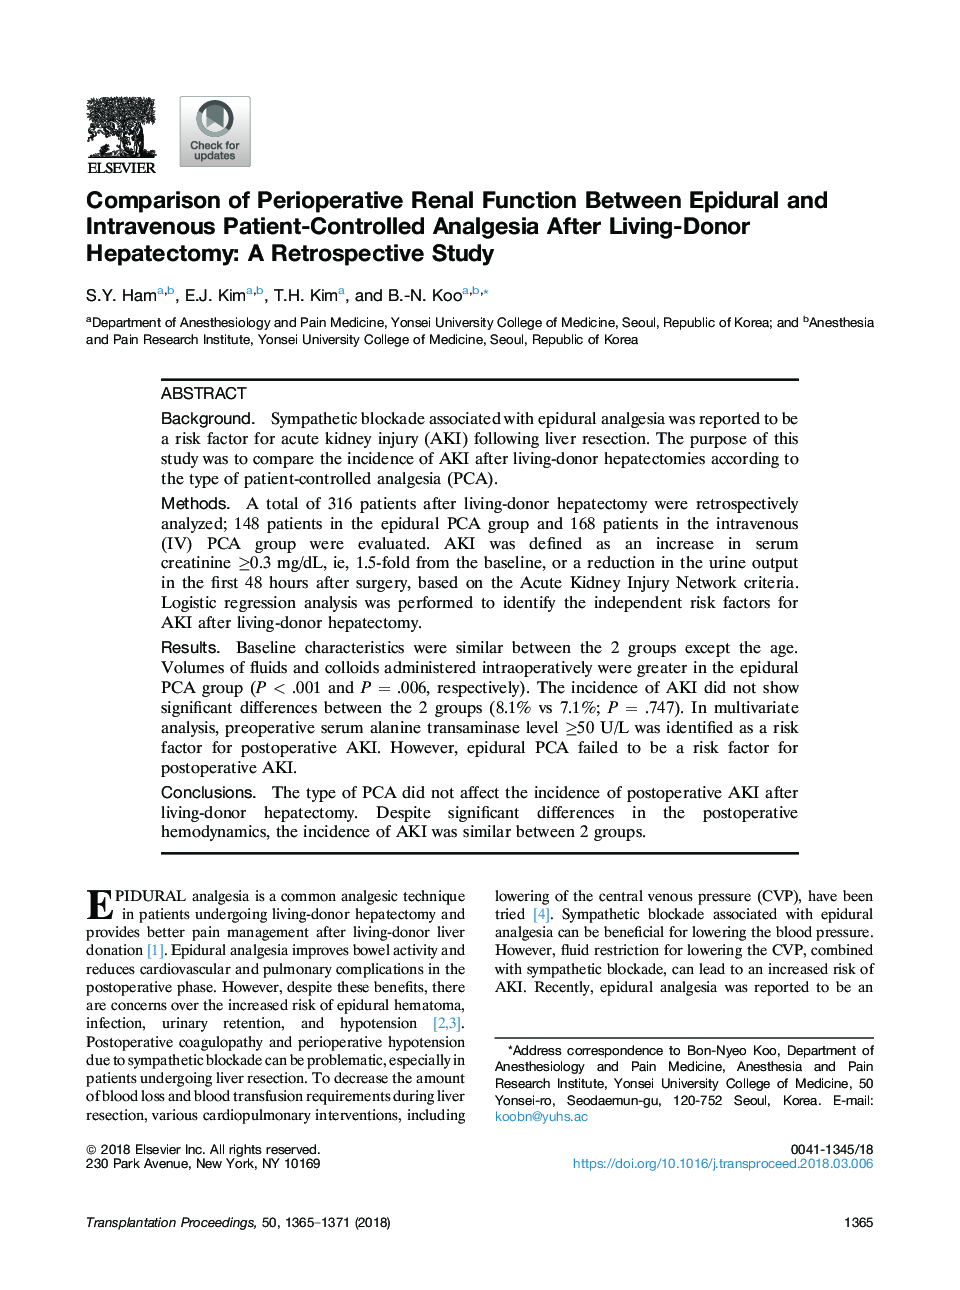 Comparison of Perioperative Renal Function Between Epidural and Intravenous Patient-Controlled Analgesia After Living-Donor Hepatectomy: A Retrospective Study